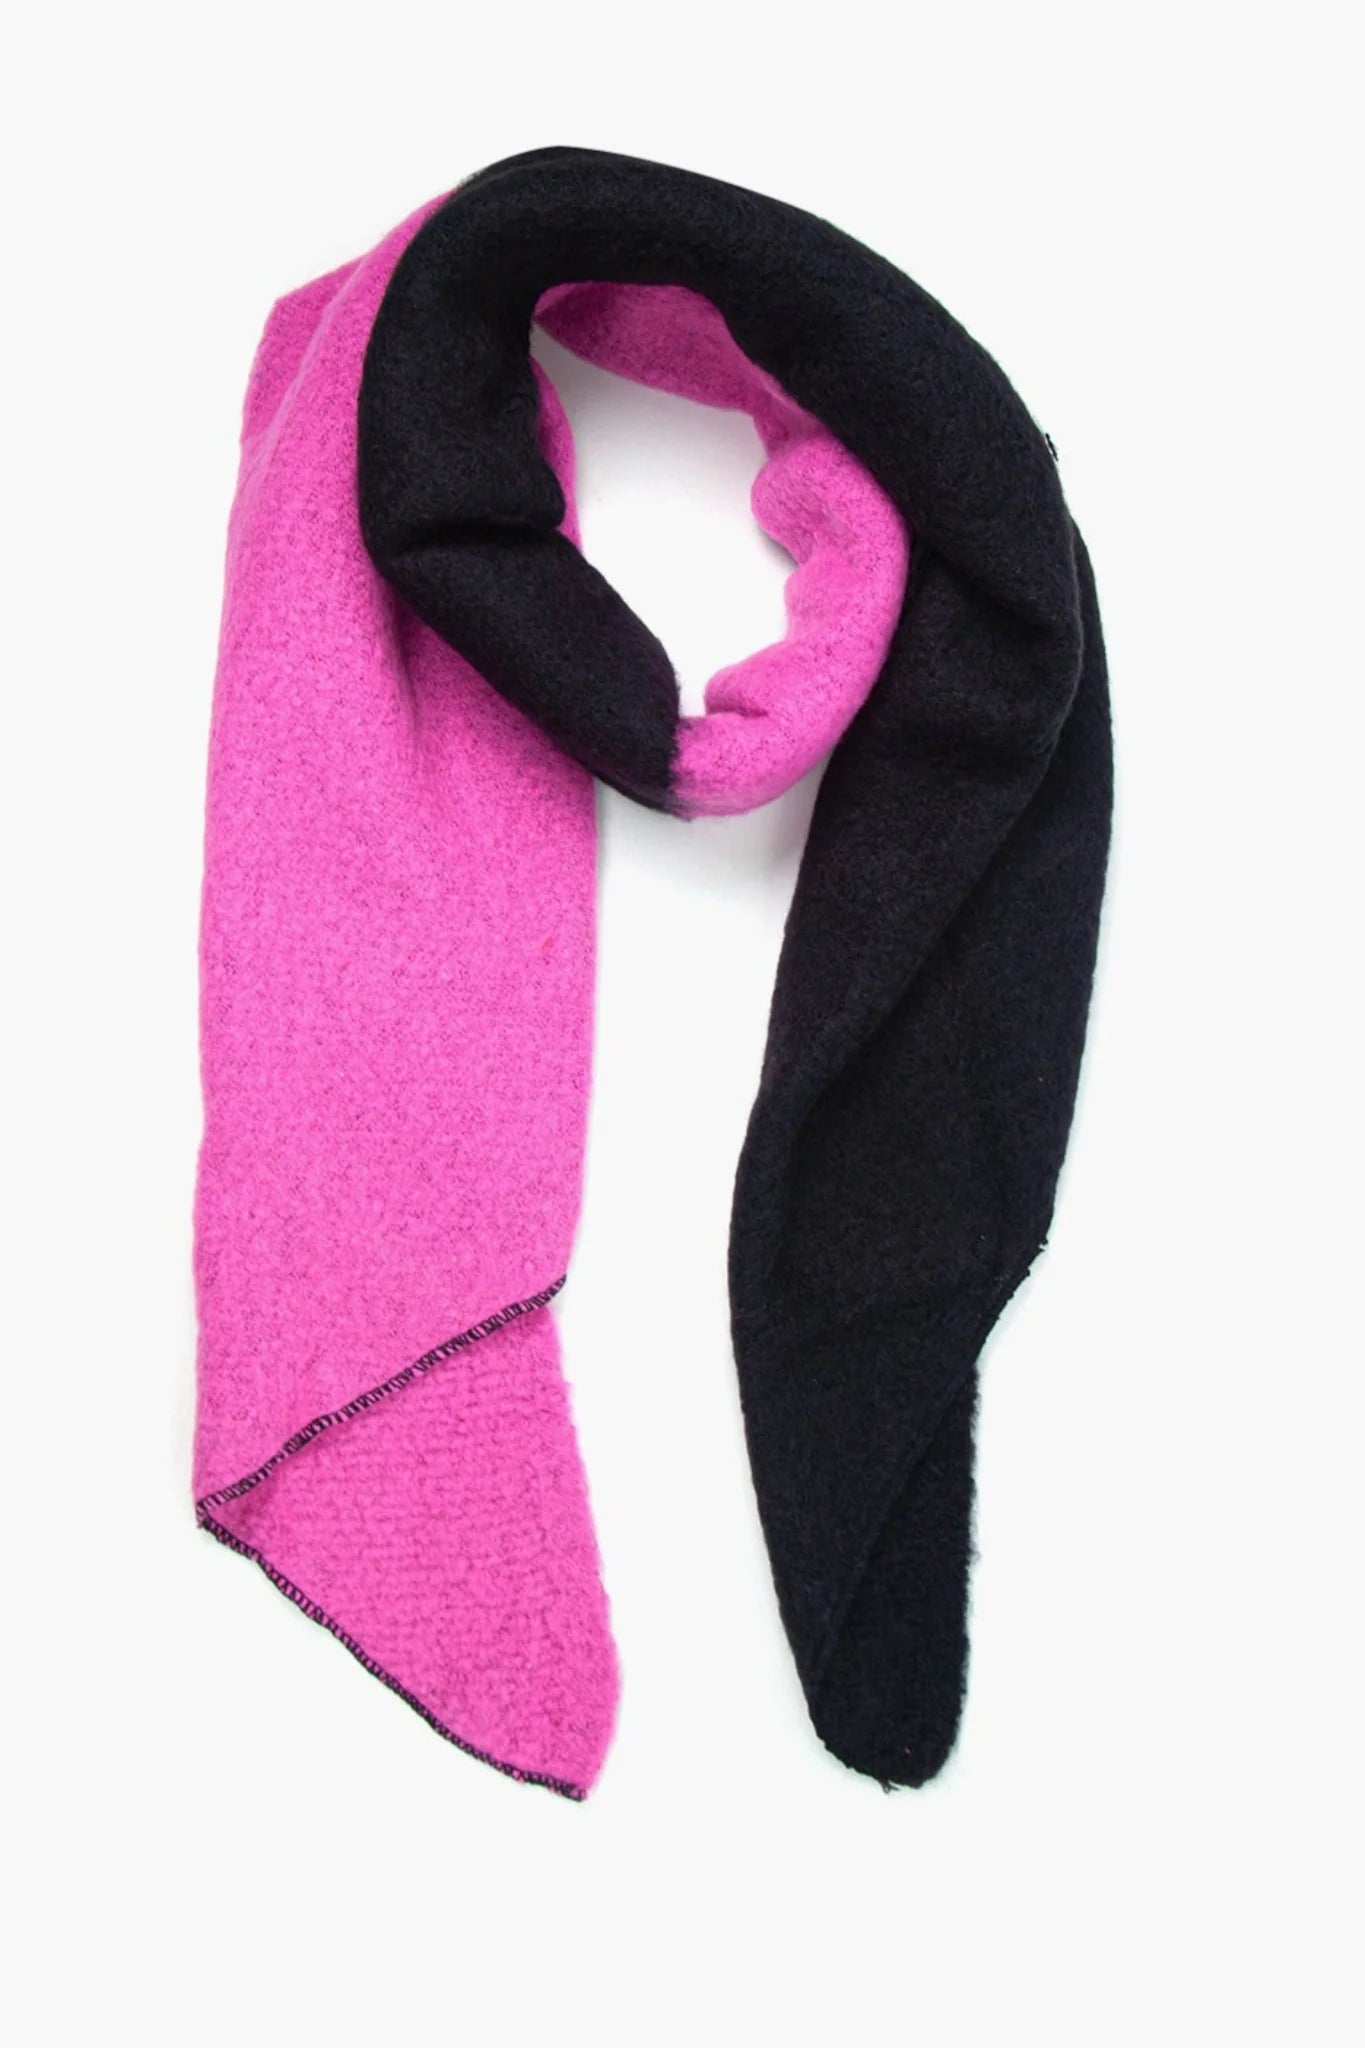 Warm Asymmetrical Scarf – Two Tone Pink and Black